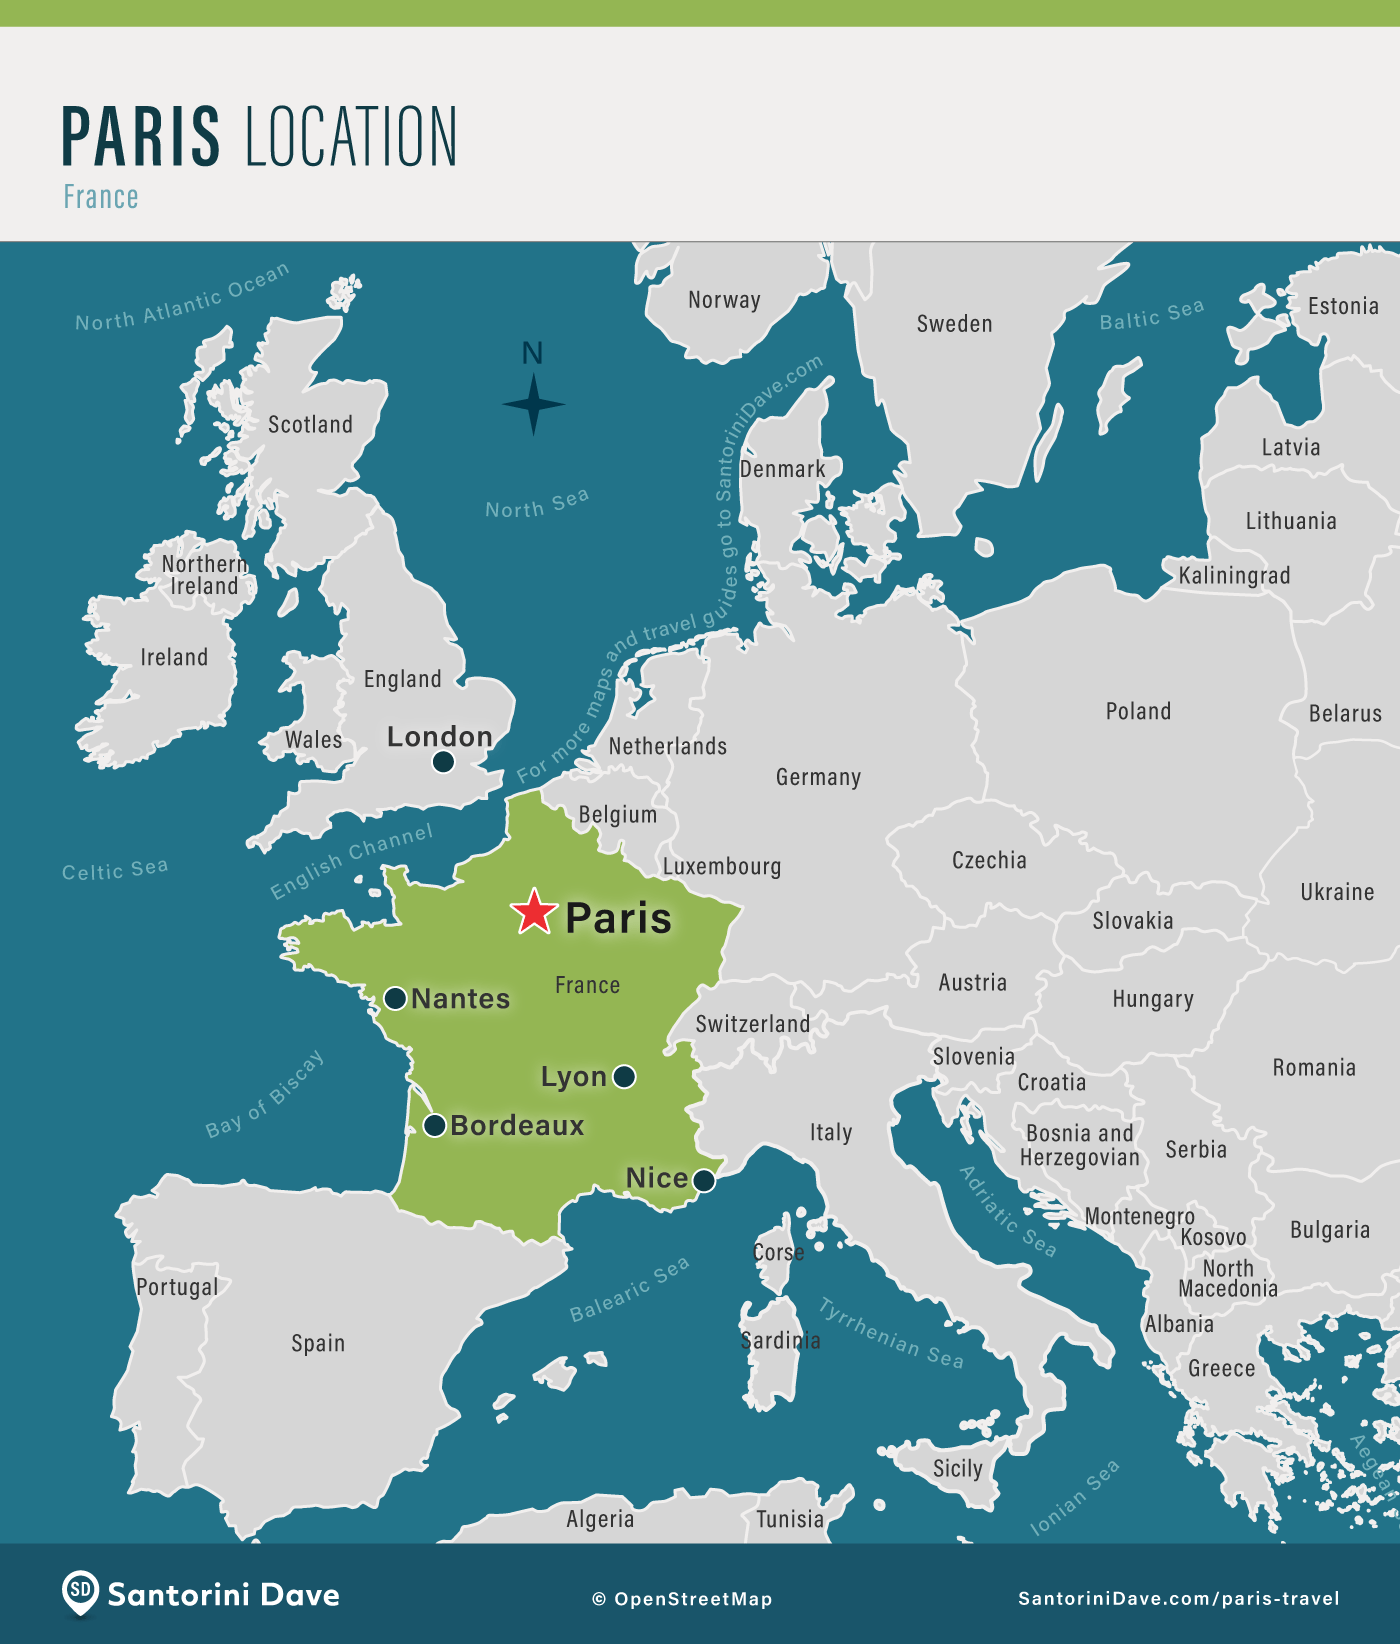 Map showing the location of Paris within France and the surrounding region